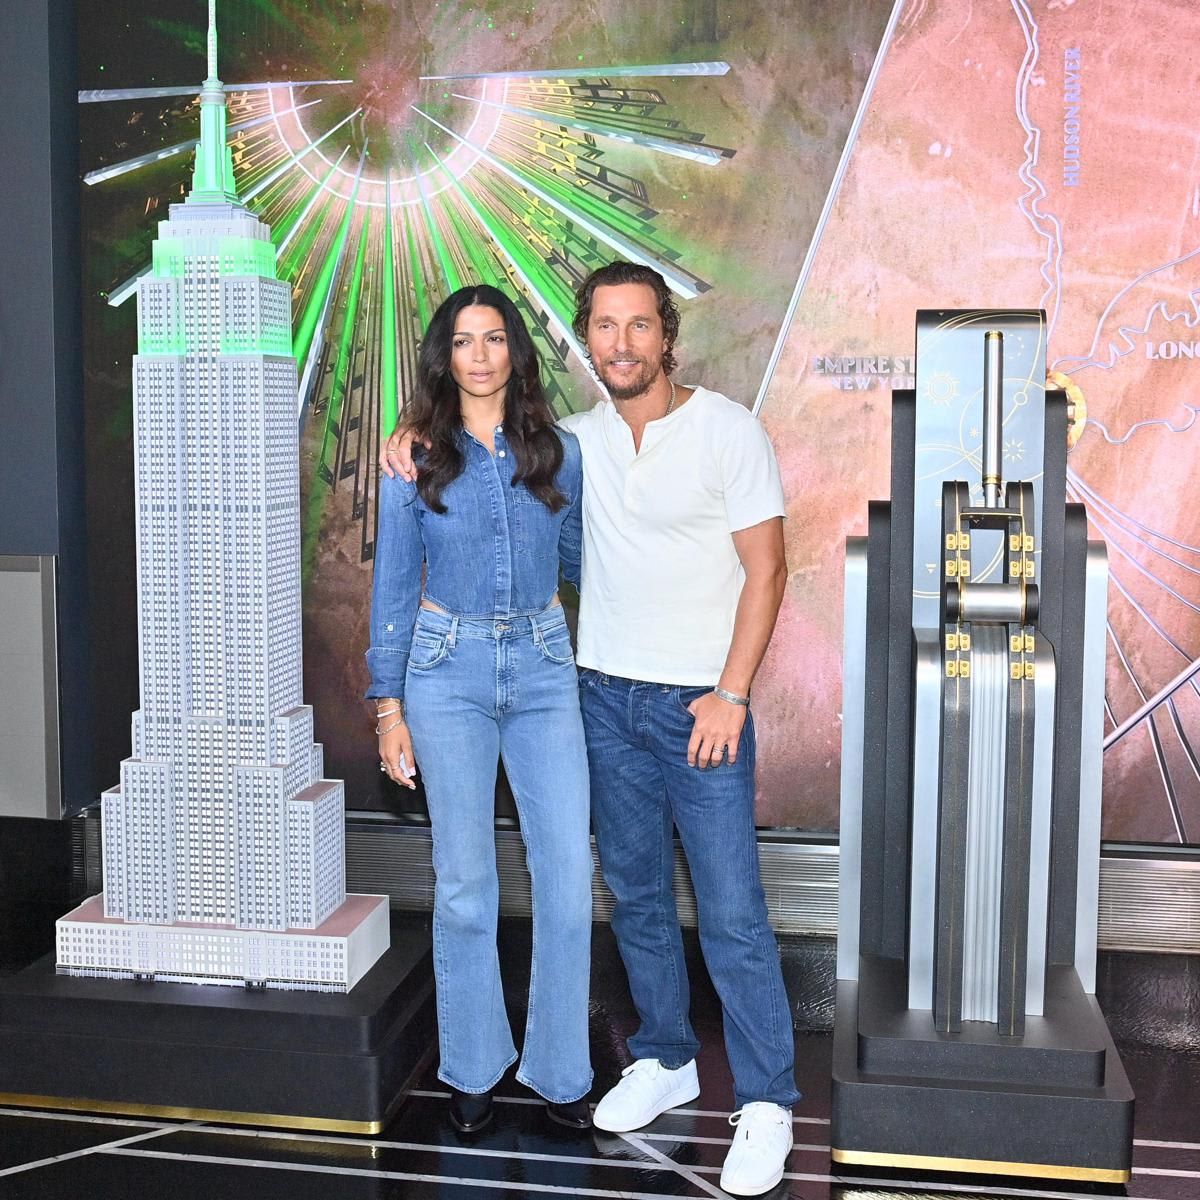 Matthew McConaughey Visits The Empire State Building